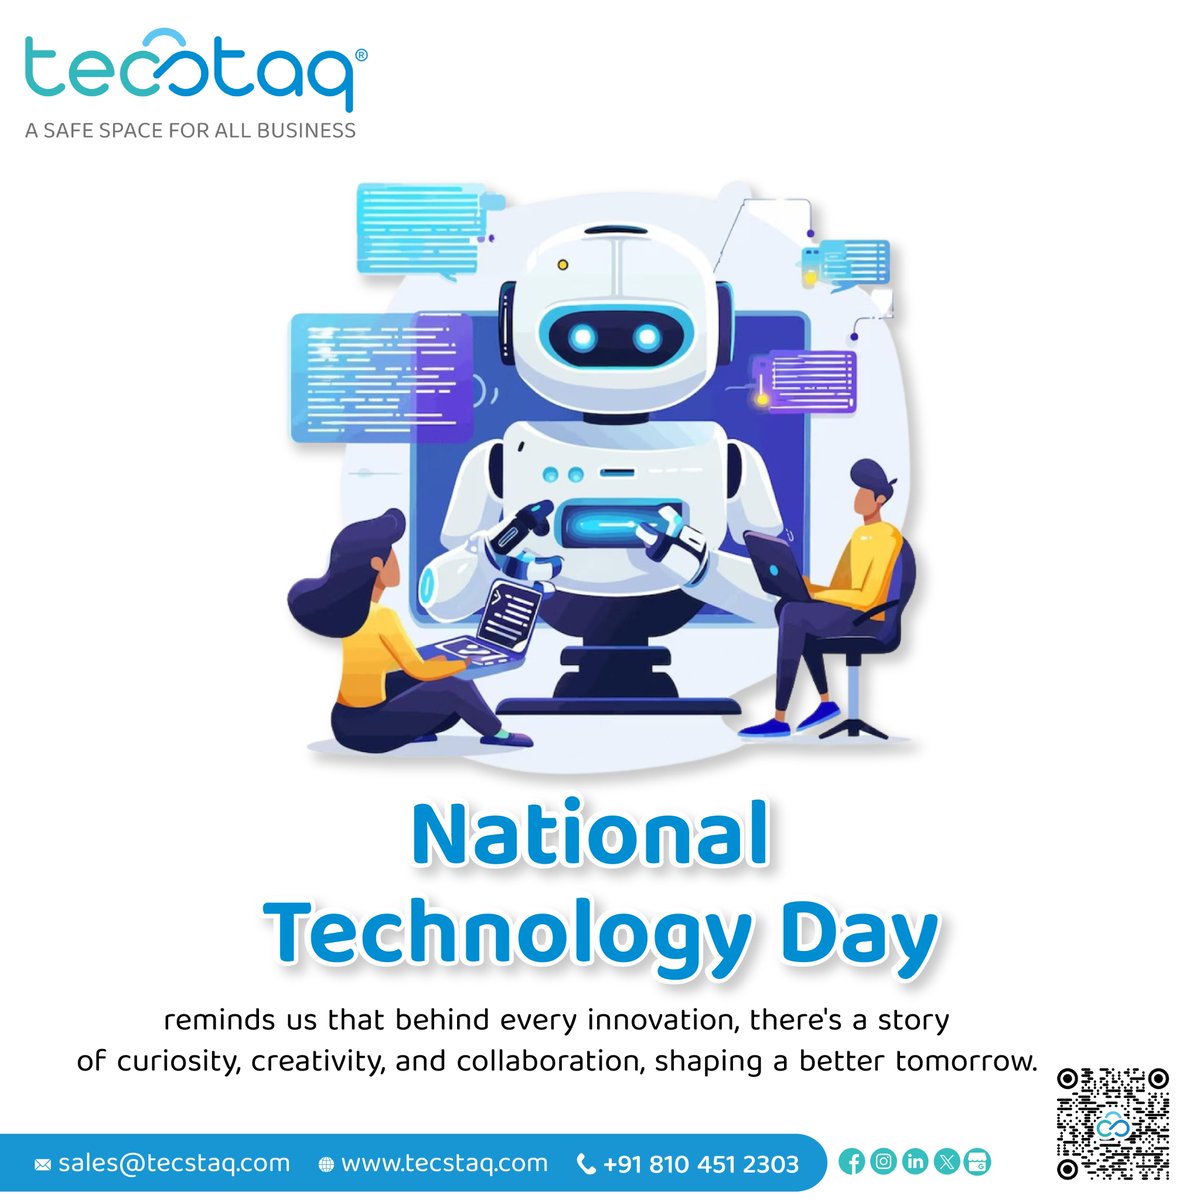 Celebrating National Technology Day with pride! Our commitment: delivering tailored IT solutions that elevate your business, be it on the cloud or on-premises. Let's continue shaping the future of tech together. #TecStaq #GreenAims #NationalTechnologyDay #TechSolutions